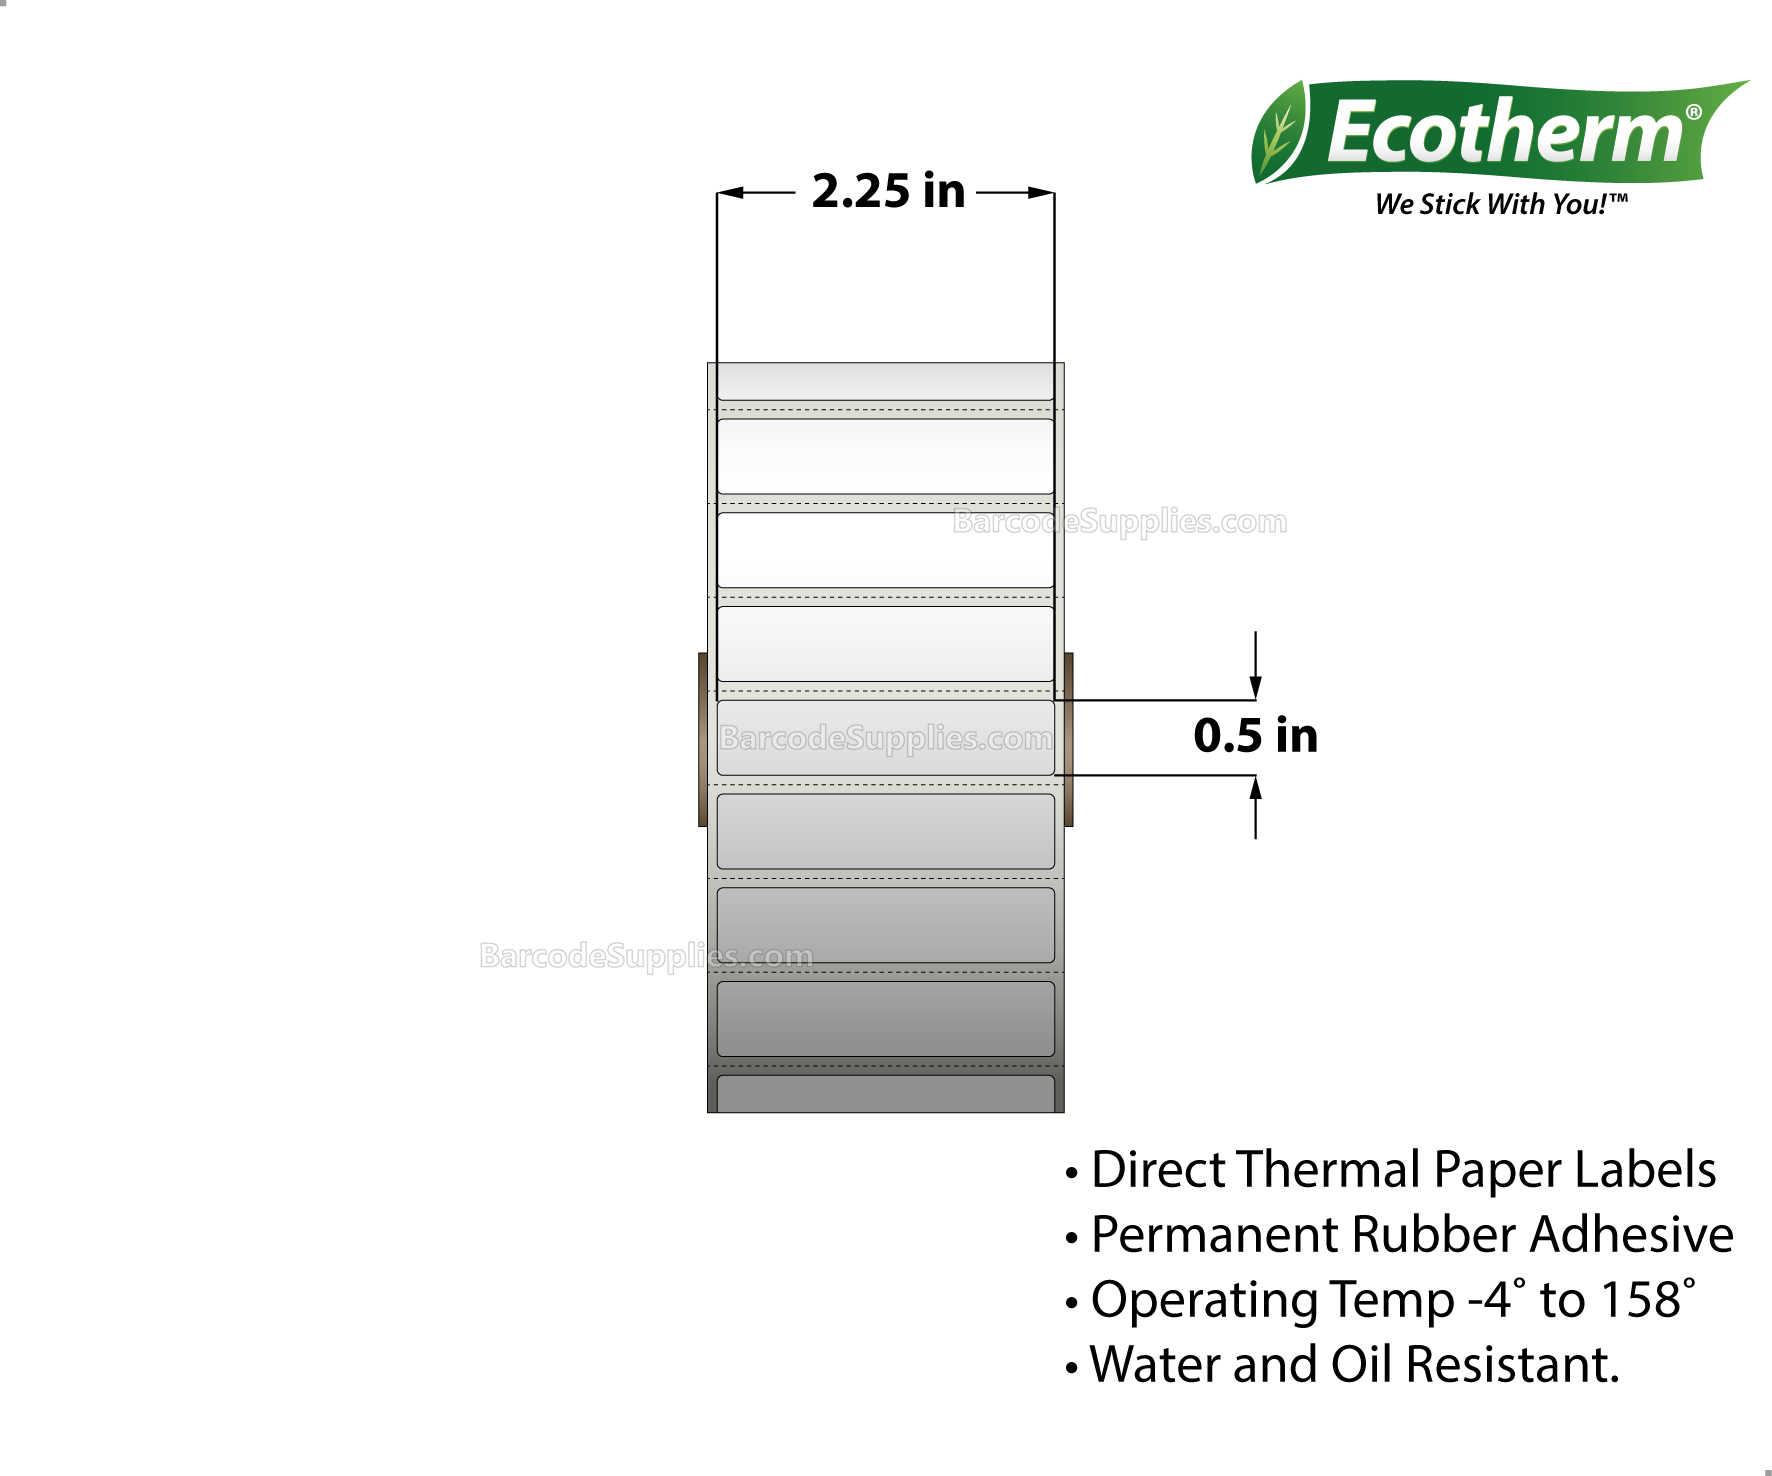 2.25 x 0.5 Direct Thermal White Labels With Rubber Adhesive - Perforated - 4200 Labels Per Roll - Carton Of 6 Rolls - 25200 Labels Total - MPN: ECOTHERM15124-6